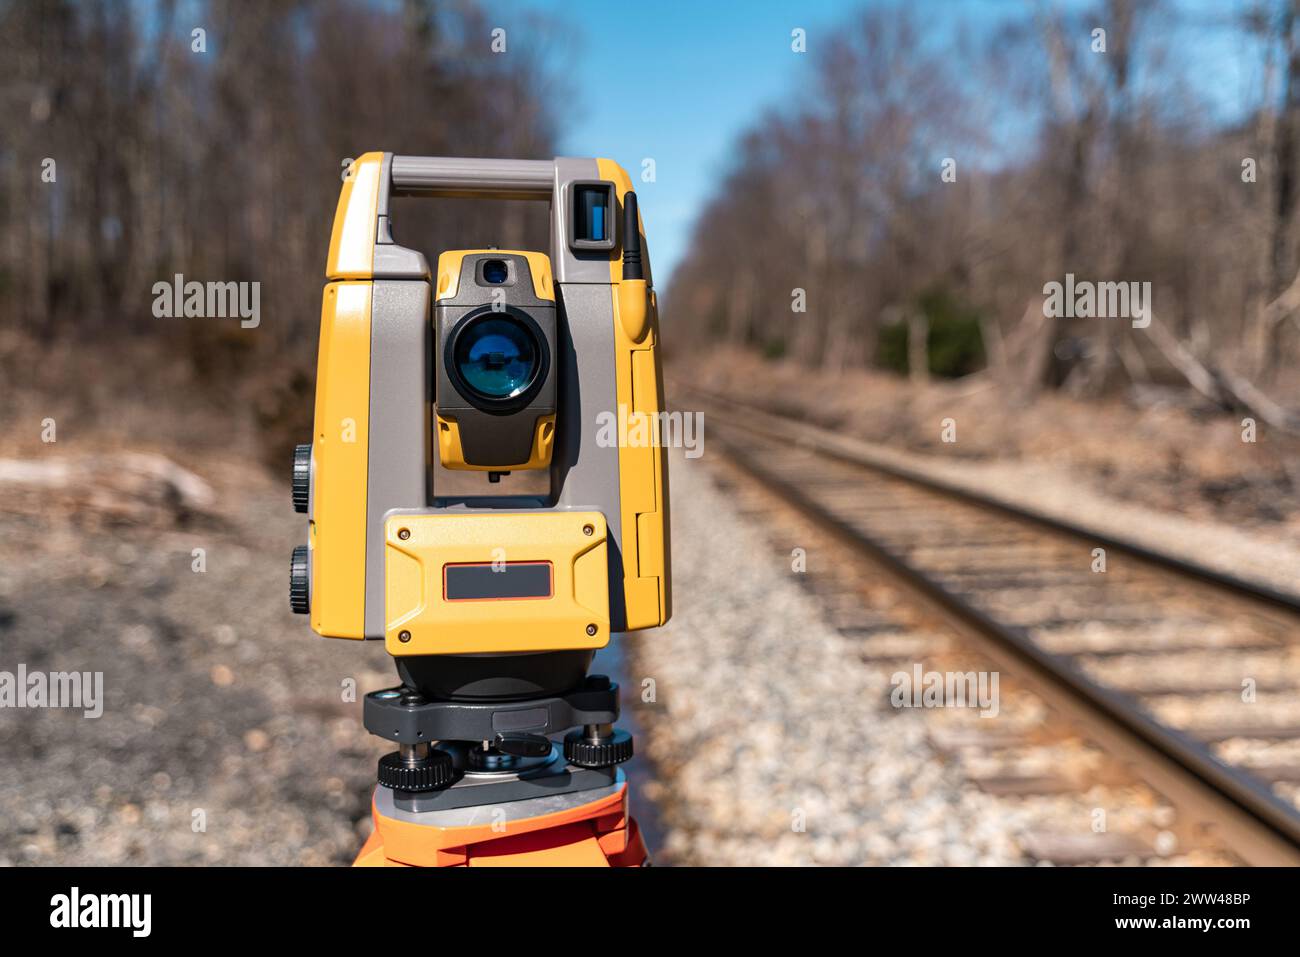 land surveying total station instrument on a tripod in the field Stock Photo